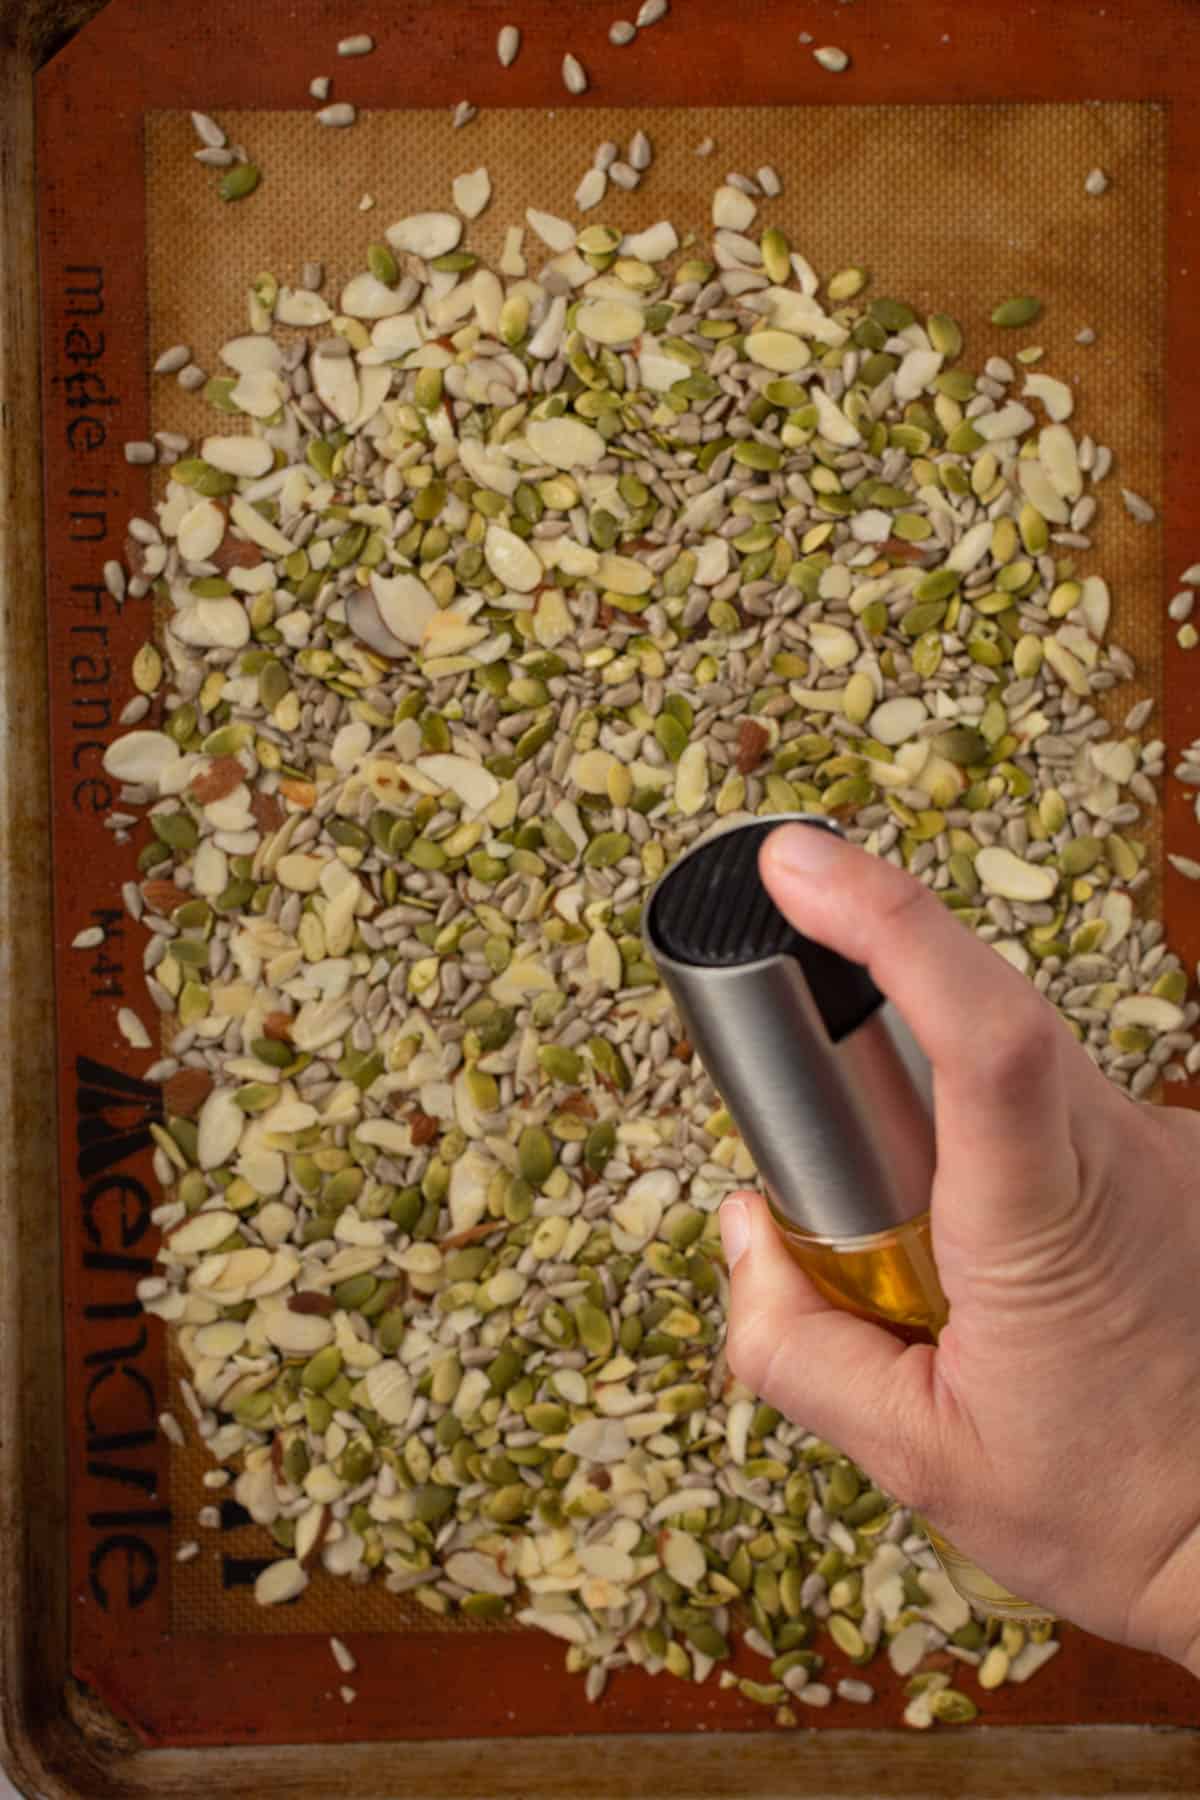 hand spraying oil onto seeds on cookie tray.